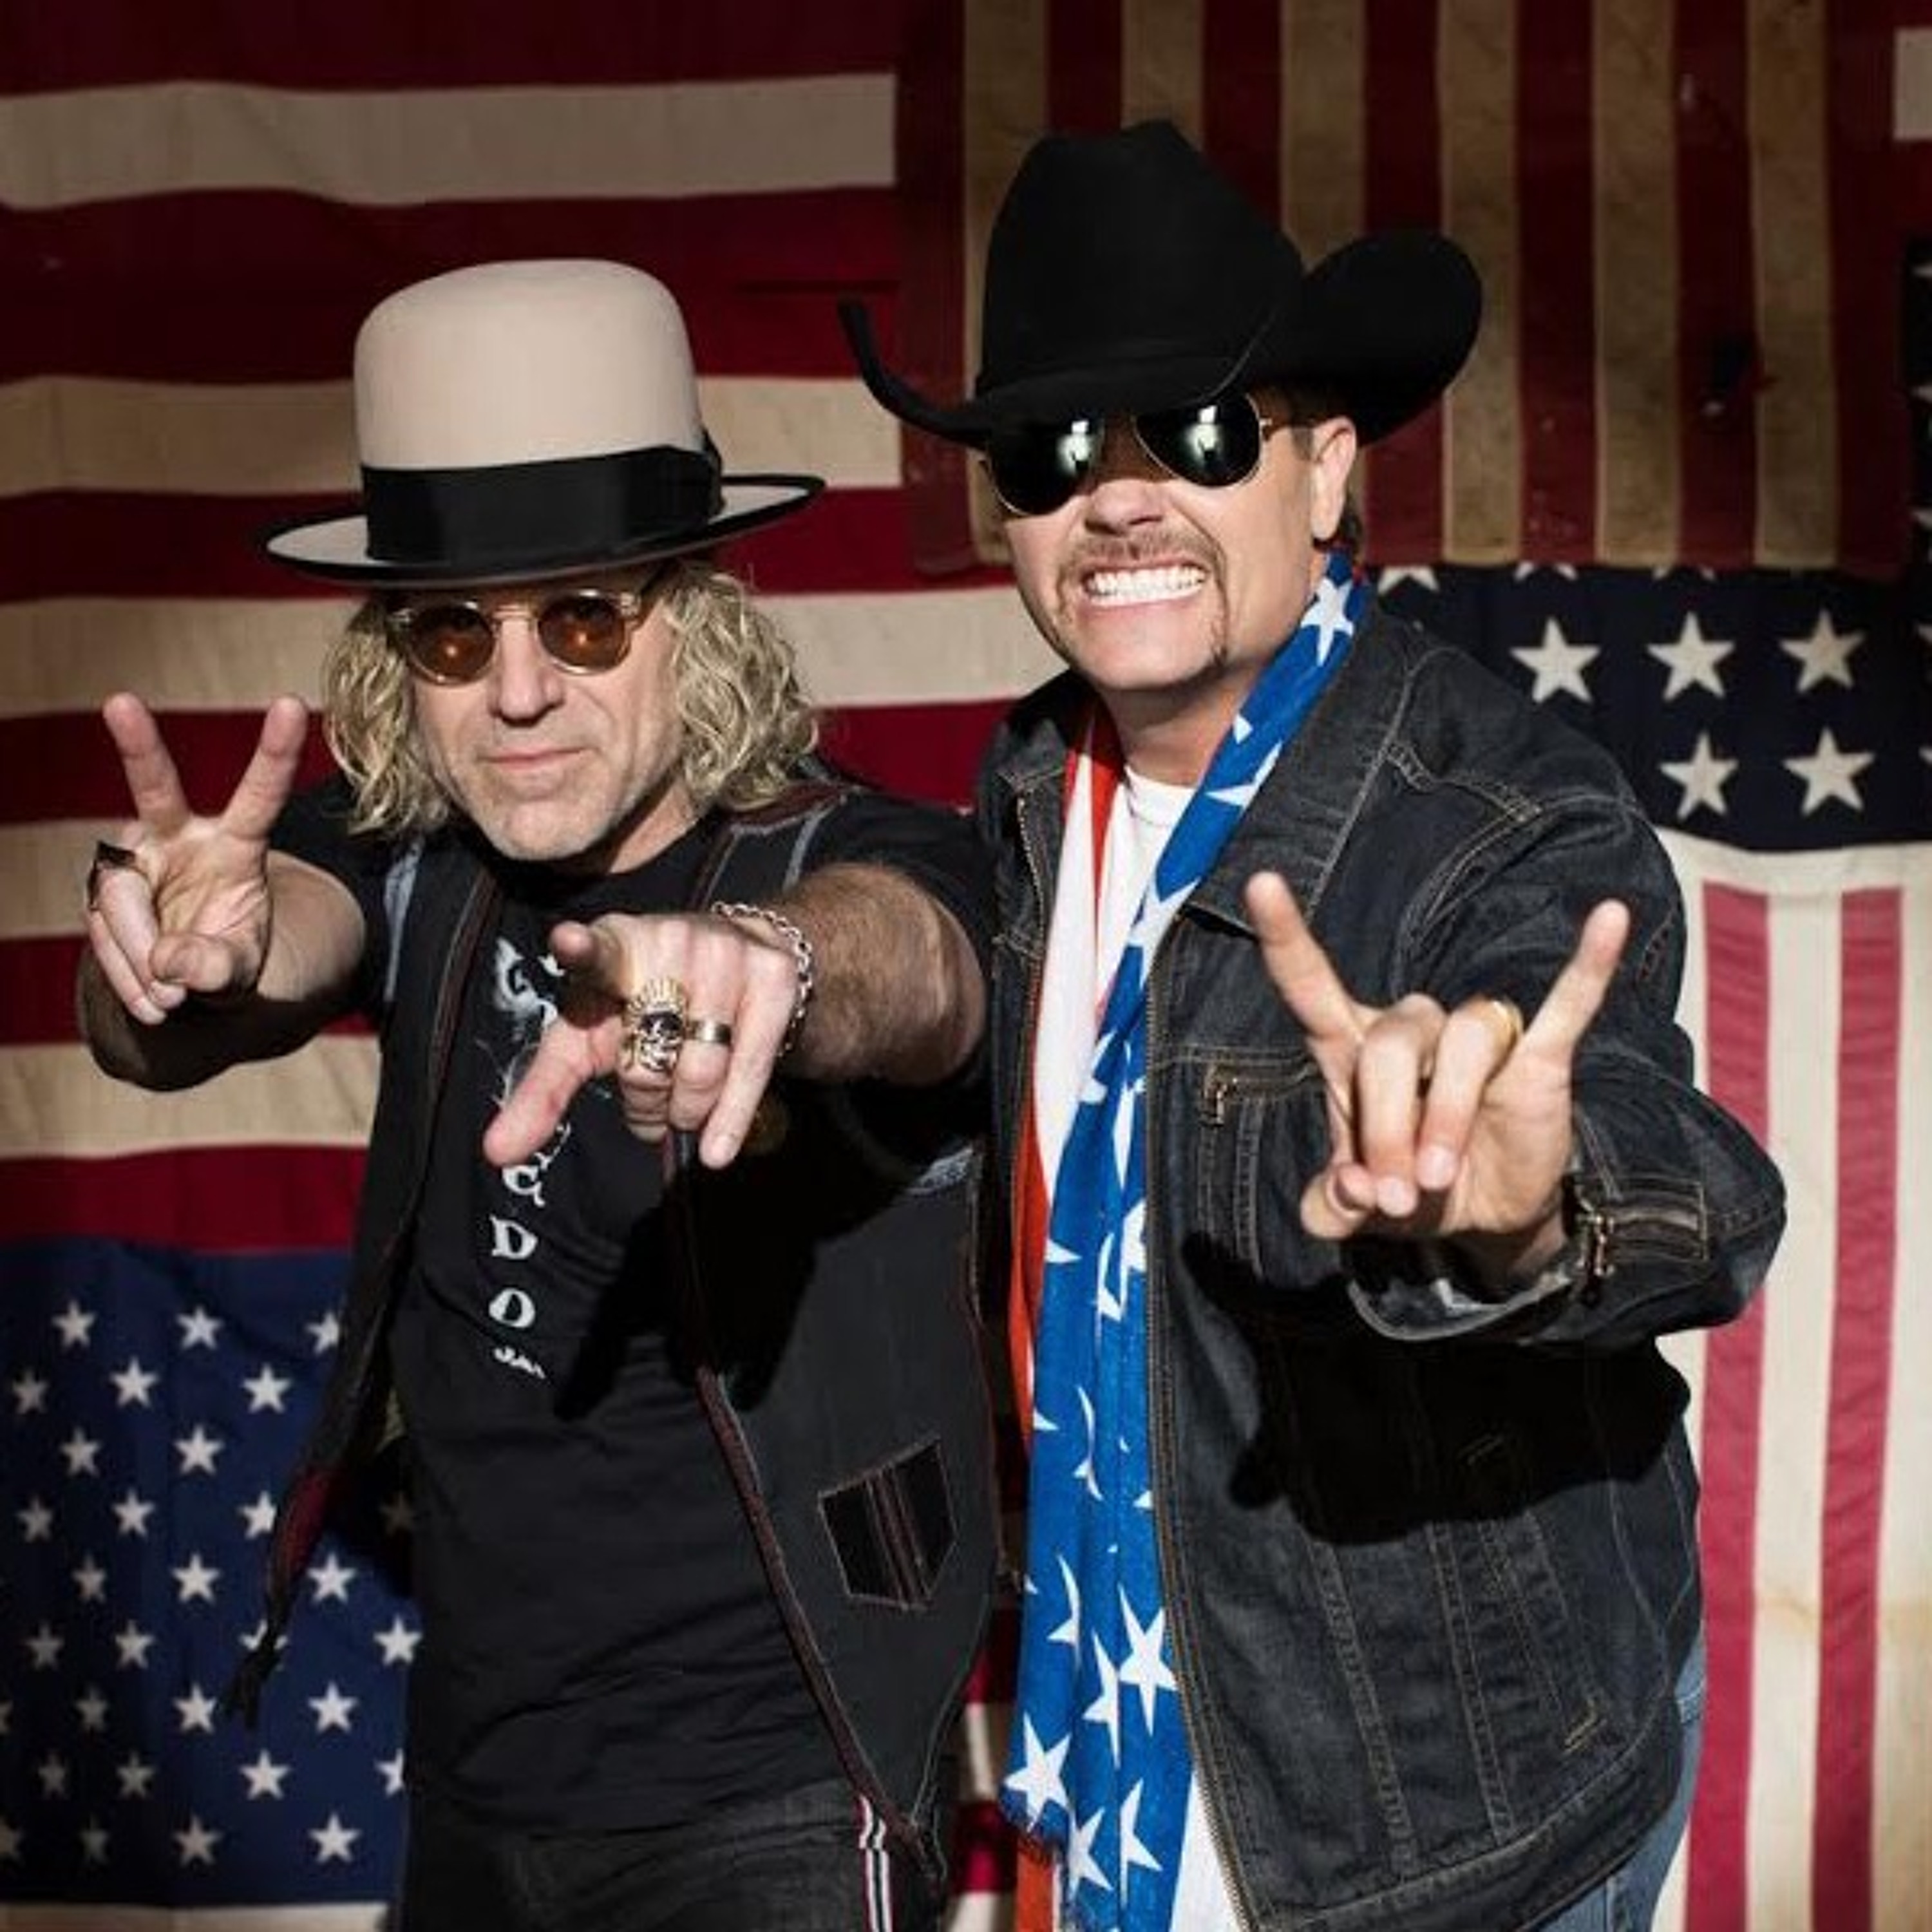 30A Show: Big and Rich